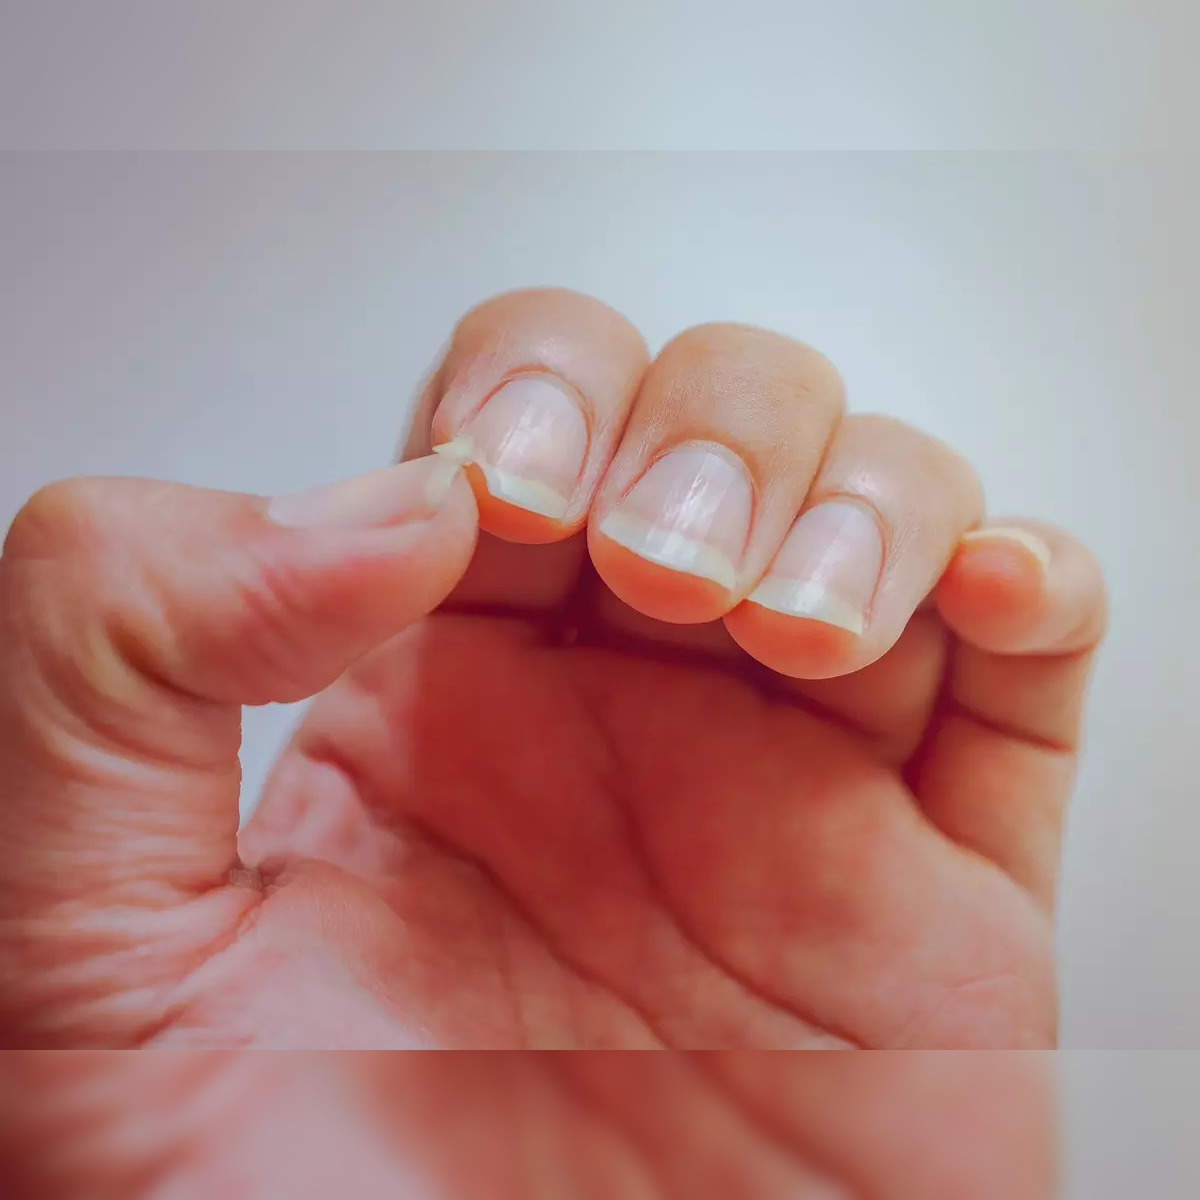 THIN AND BRITTLE NAILS COULD BE THE SIGN OF AN UNDERLYING DISEASE